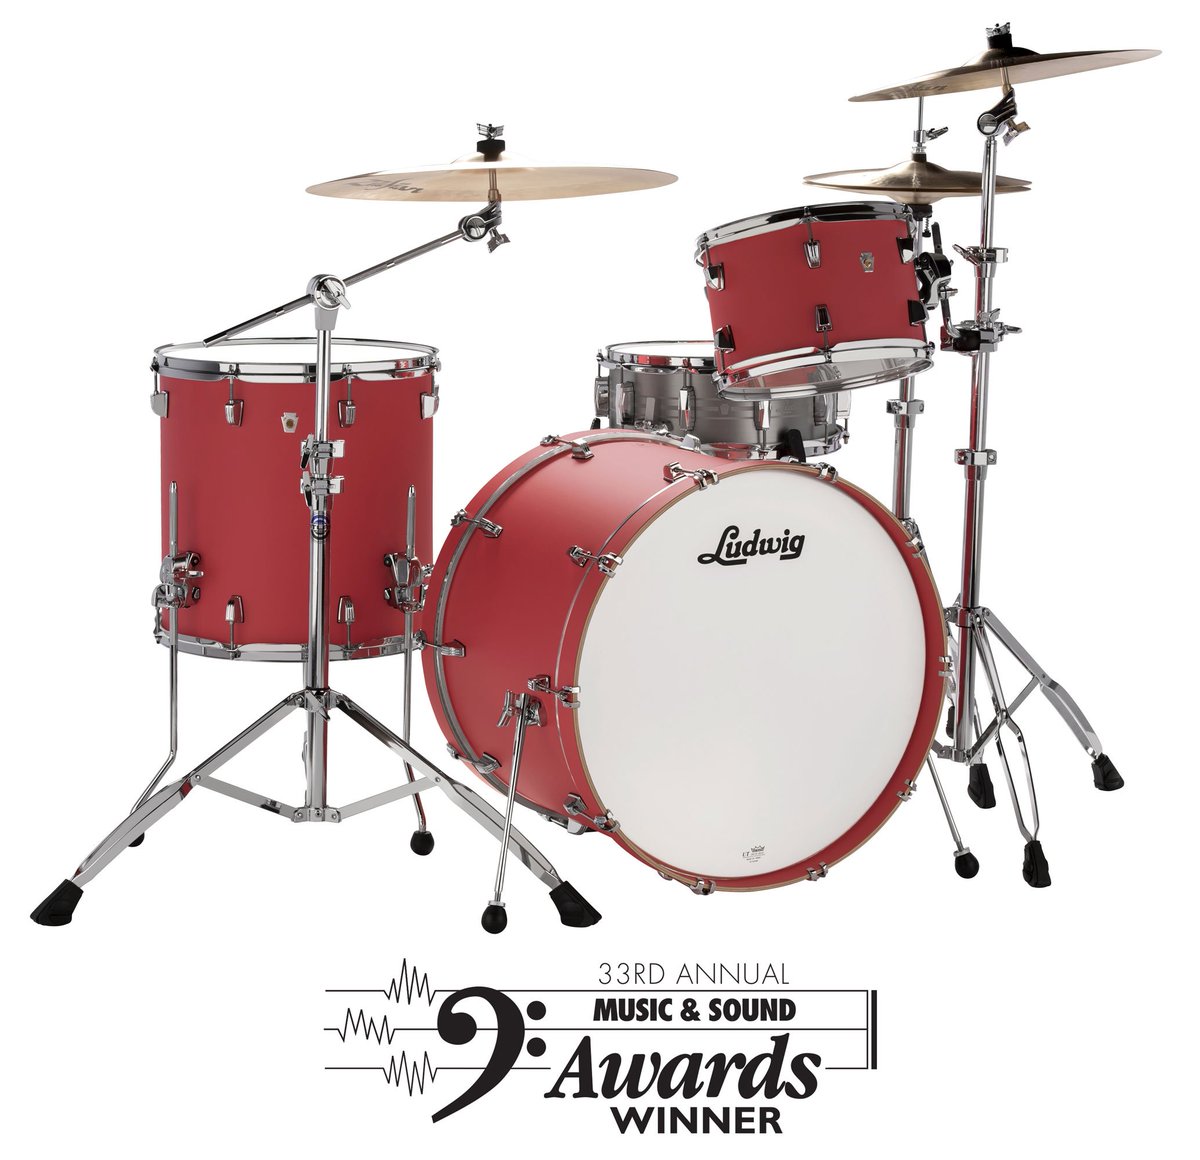 The Ludwig NeuSonic was awarded the 'Best Acoustic Drum Product of 2018' by The Music & Sound Retailer. Contact your Ludwig dealer to get the most affordable USA made drum kit on the market! NeuSonic Info: bit.ly/2TfbNdA